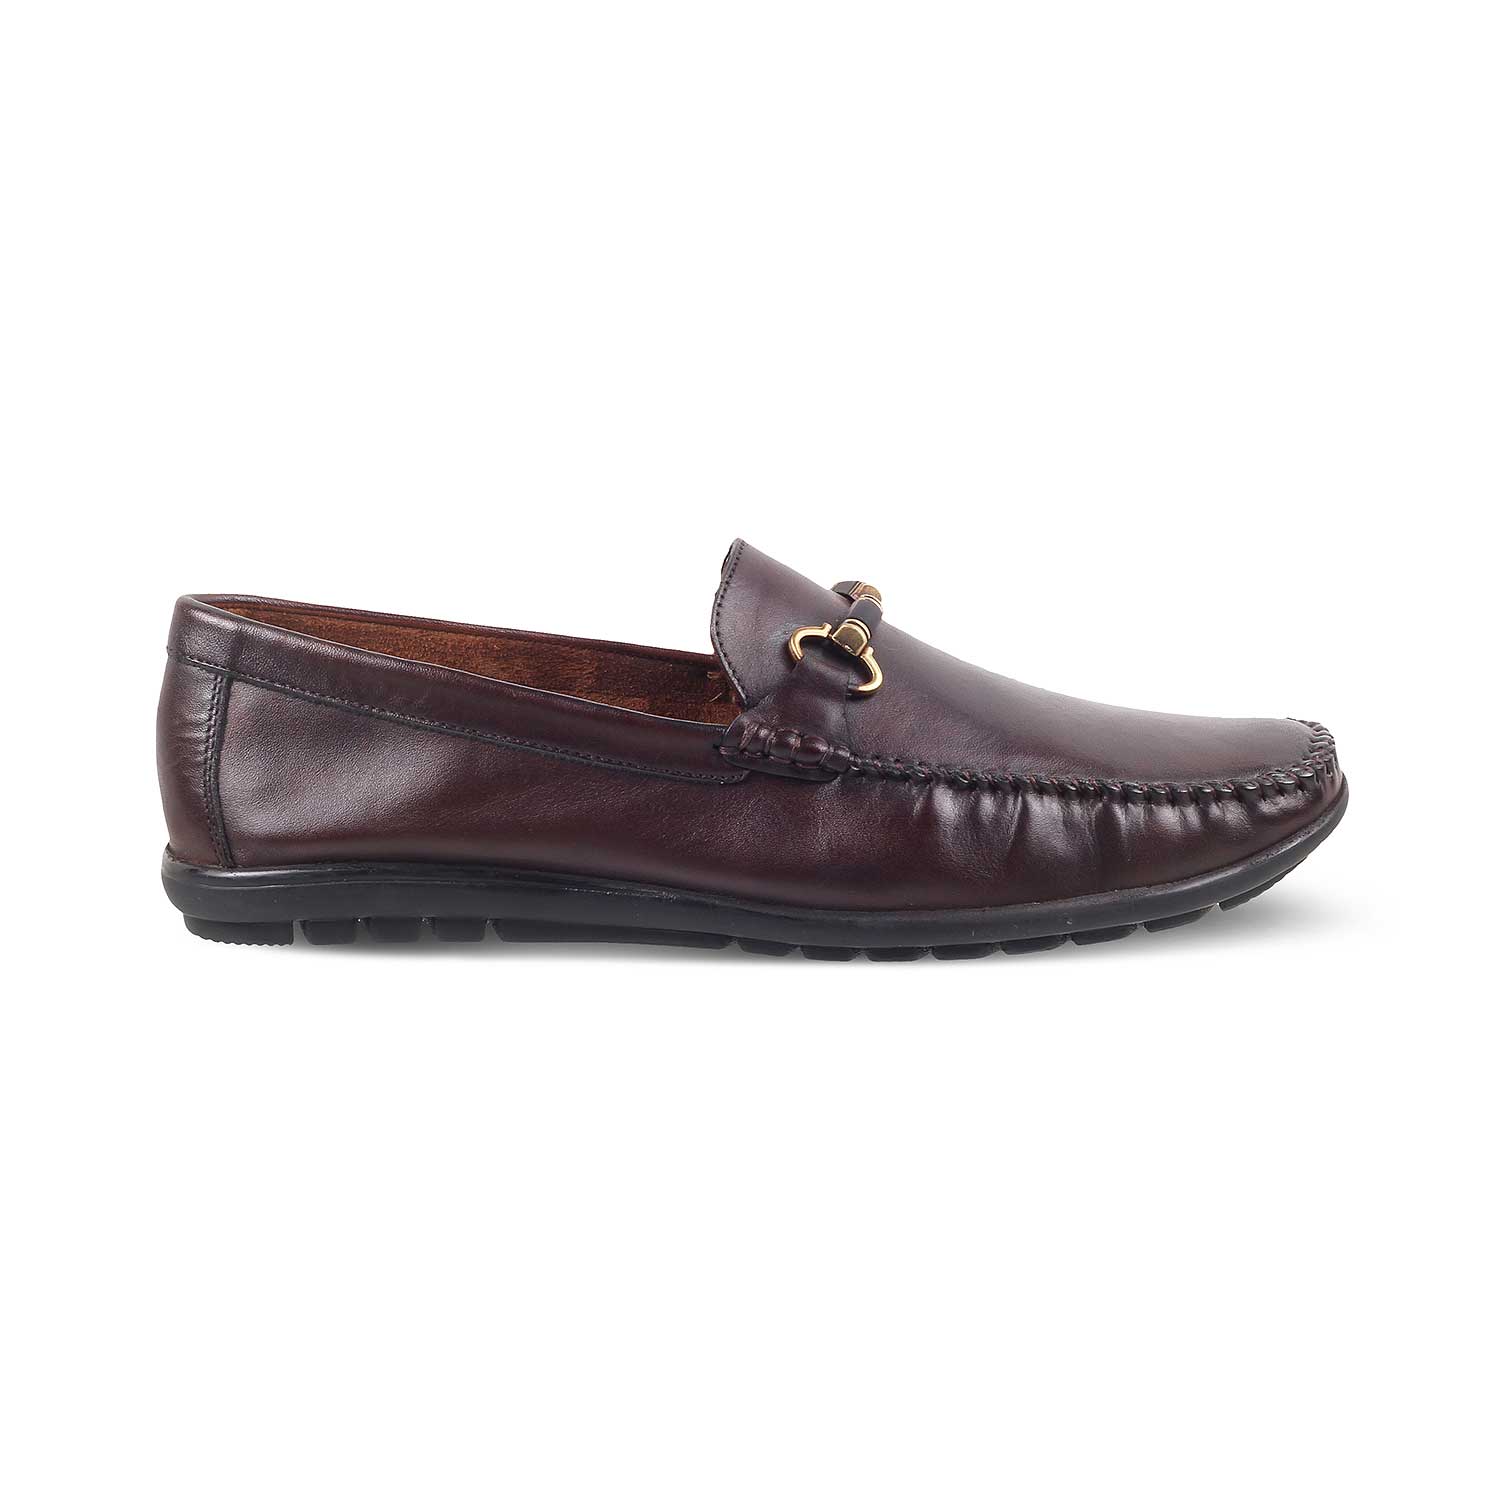 Tresmode-The Freccia Brown Men's Leather Driving Loafers Tresmode-Tresmode